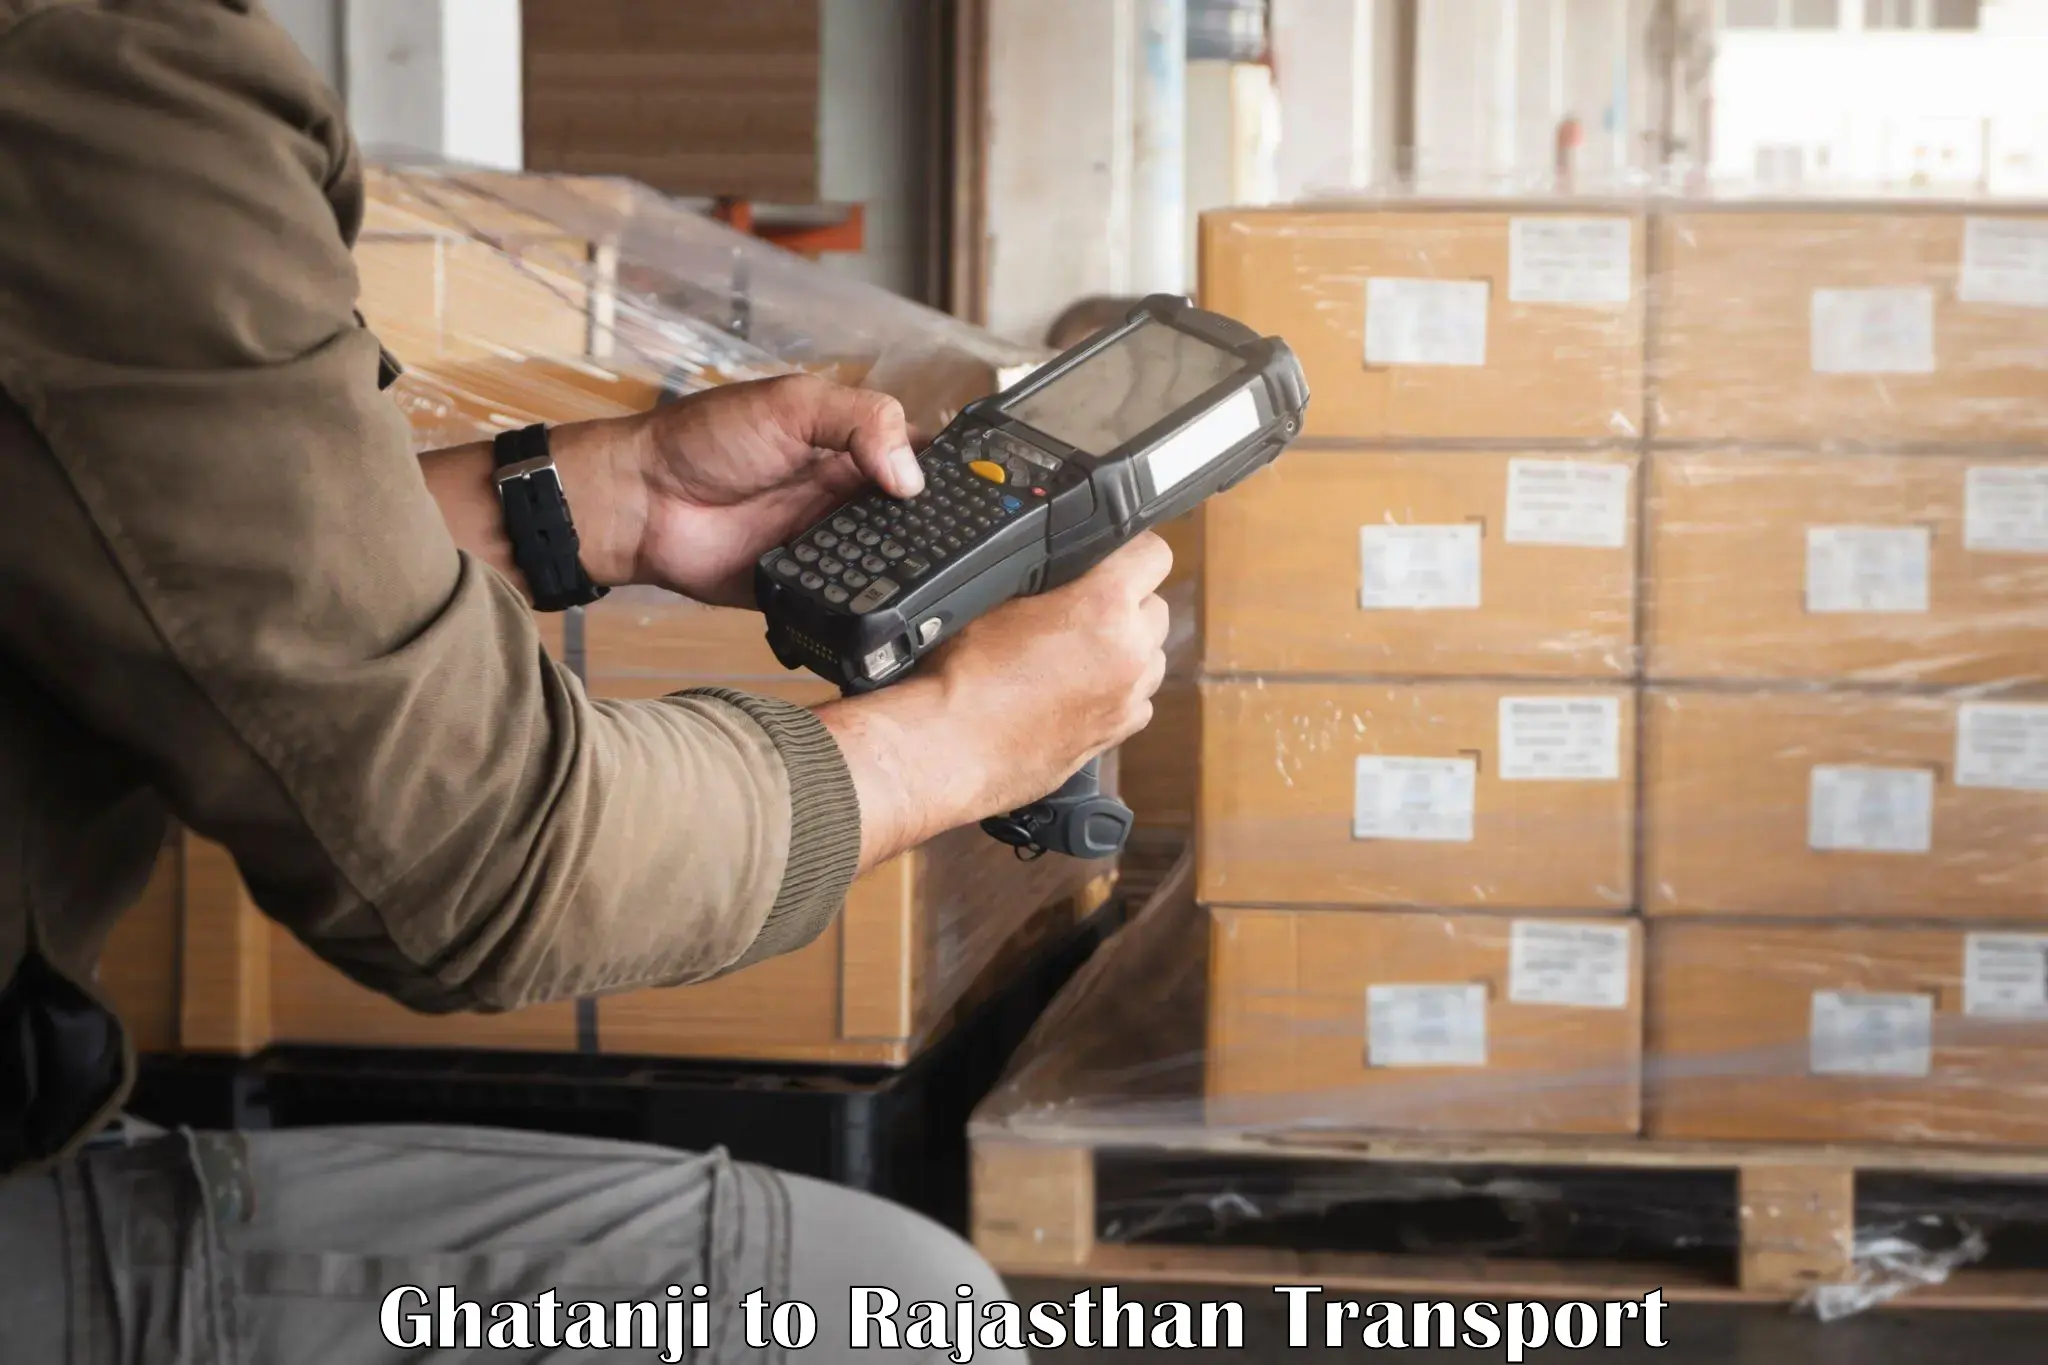 Container transport service Ghatanji to Nohar